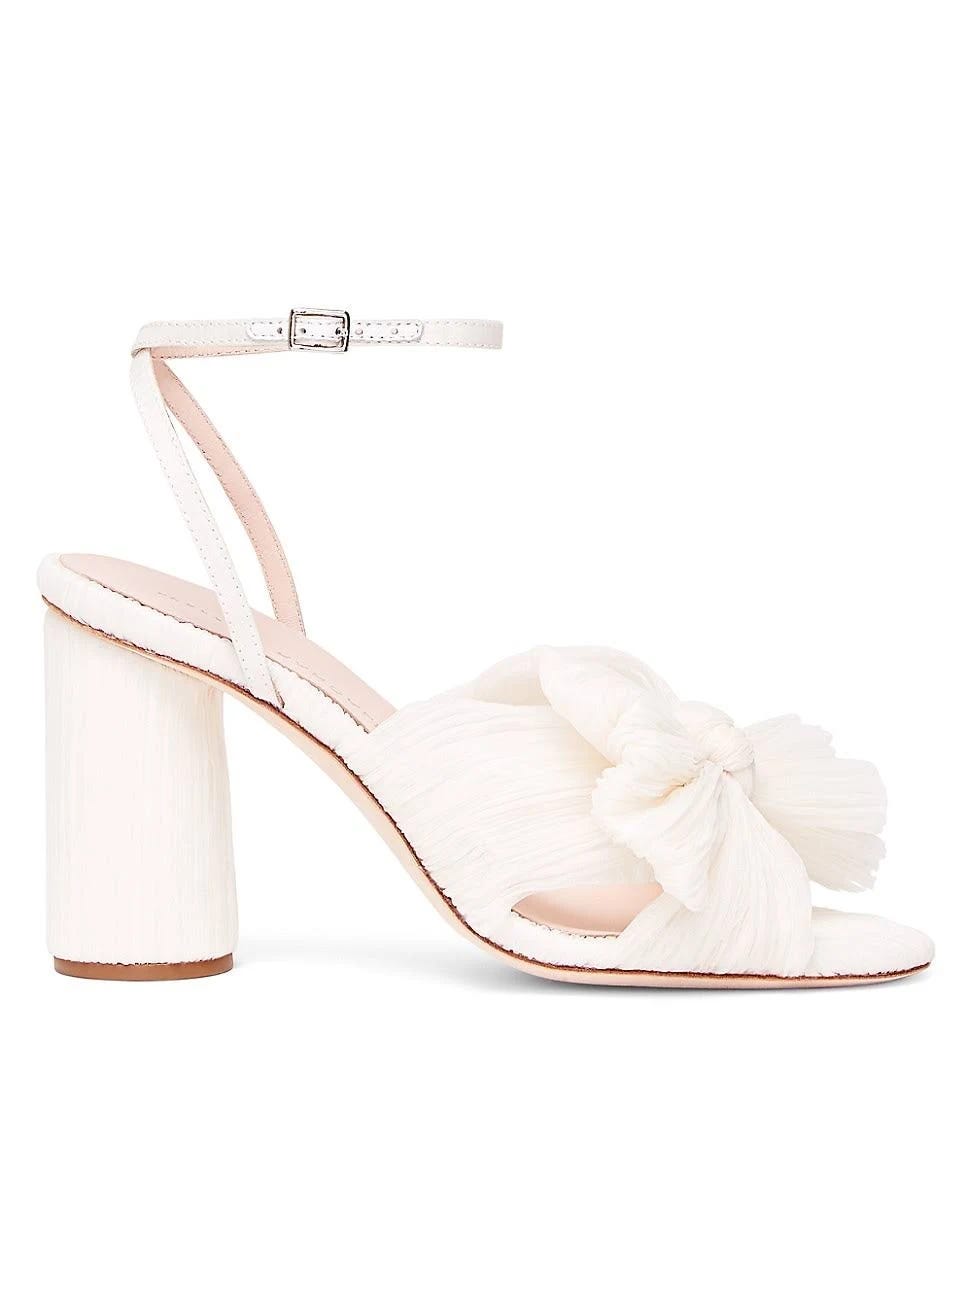 Elegant Camellia Sandals with Ankle Strap and Pearl Finish | Image